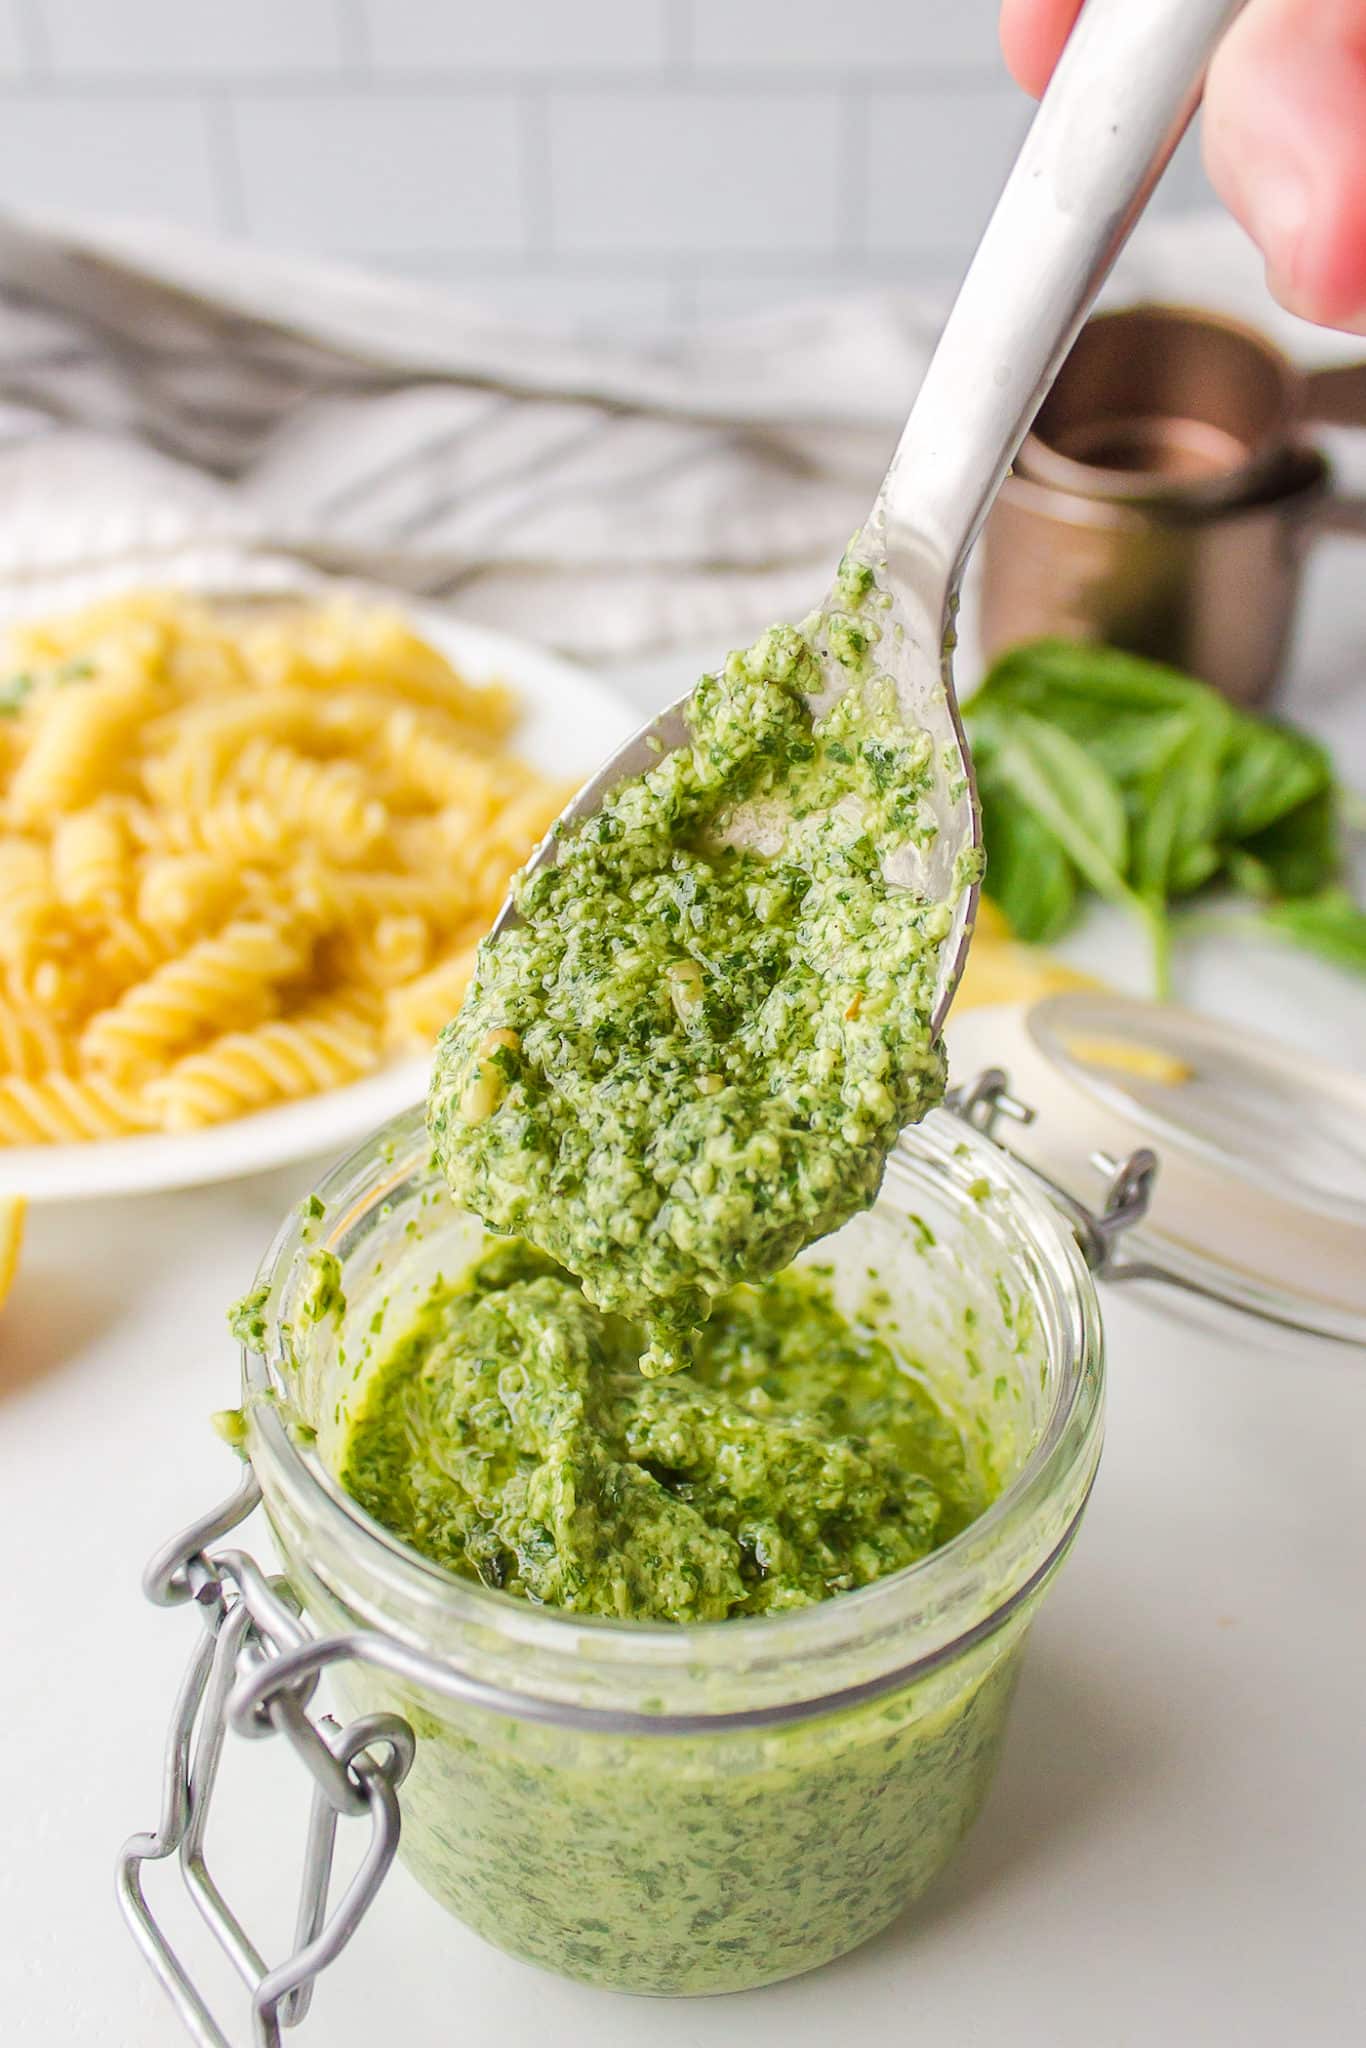 spoonful of vegan pesto sauce getting ready to add to cooked pasta.